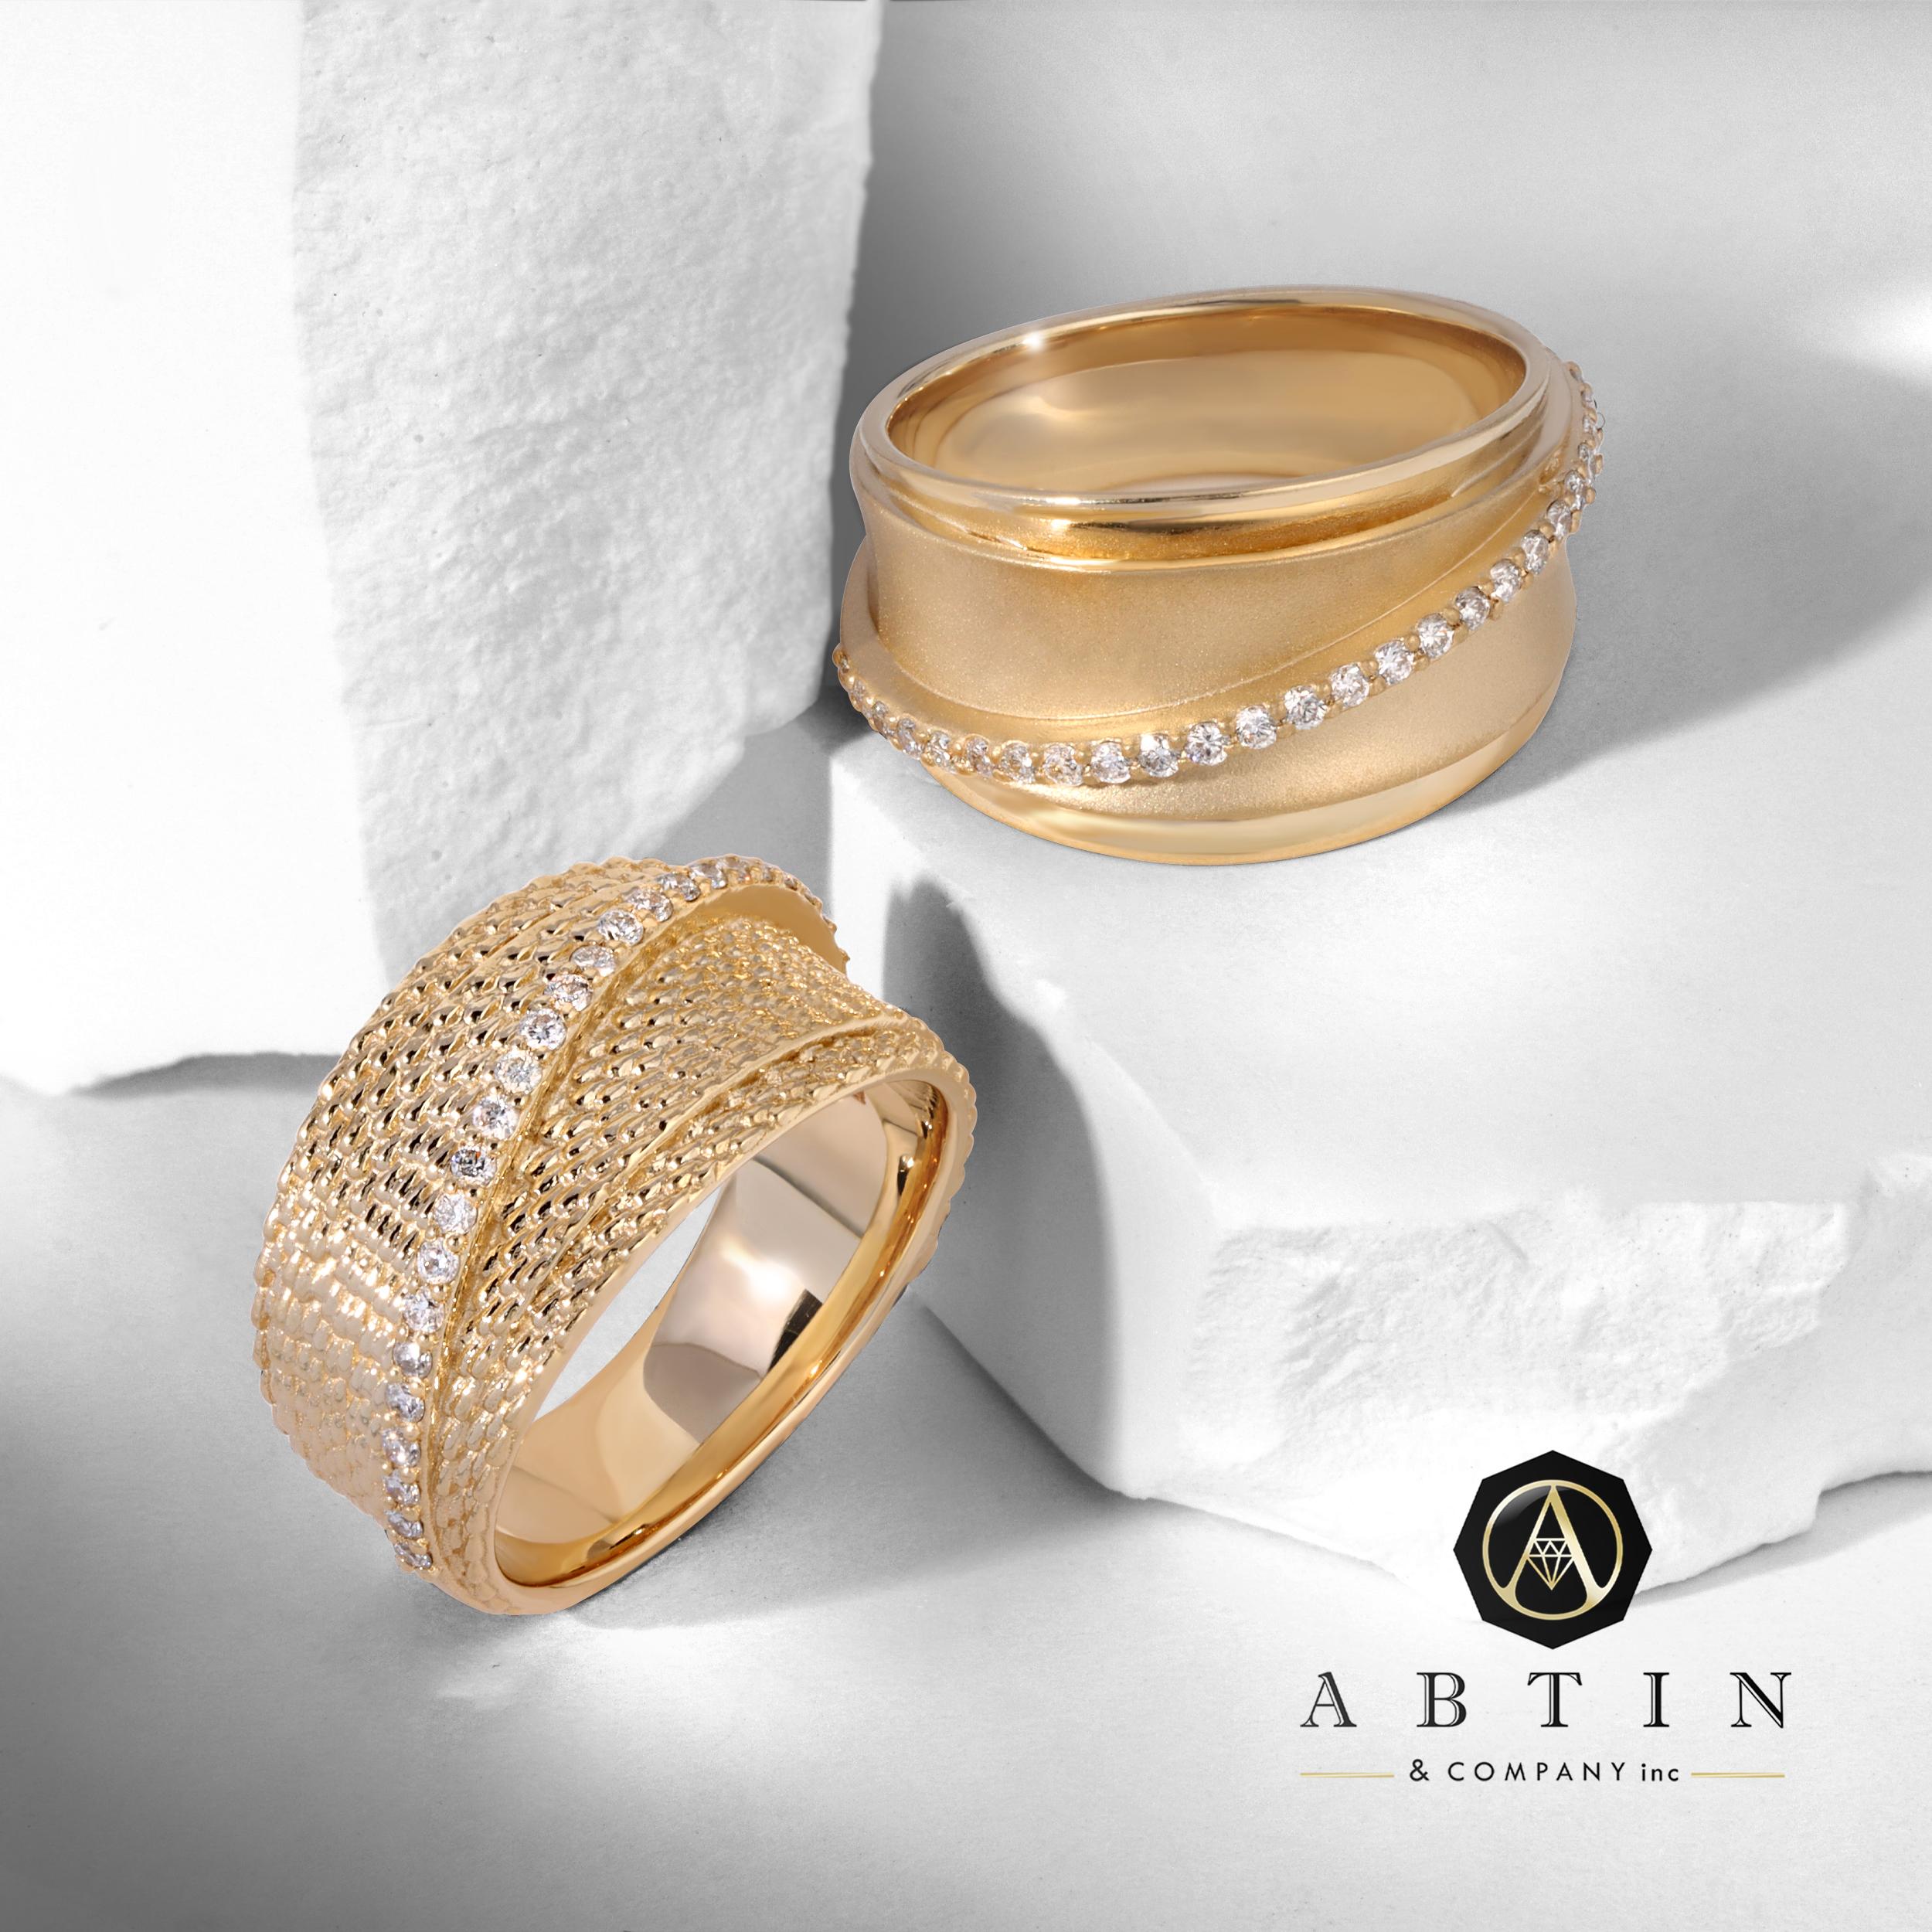  Crafted in 14k gold, this overlap diamond ring features brilliant cut diamonds set in yellow gold, showcasing a distinctive and luxurious design. Its signature texture is achieved through the meticulous wrapping of fine gold thread around a